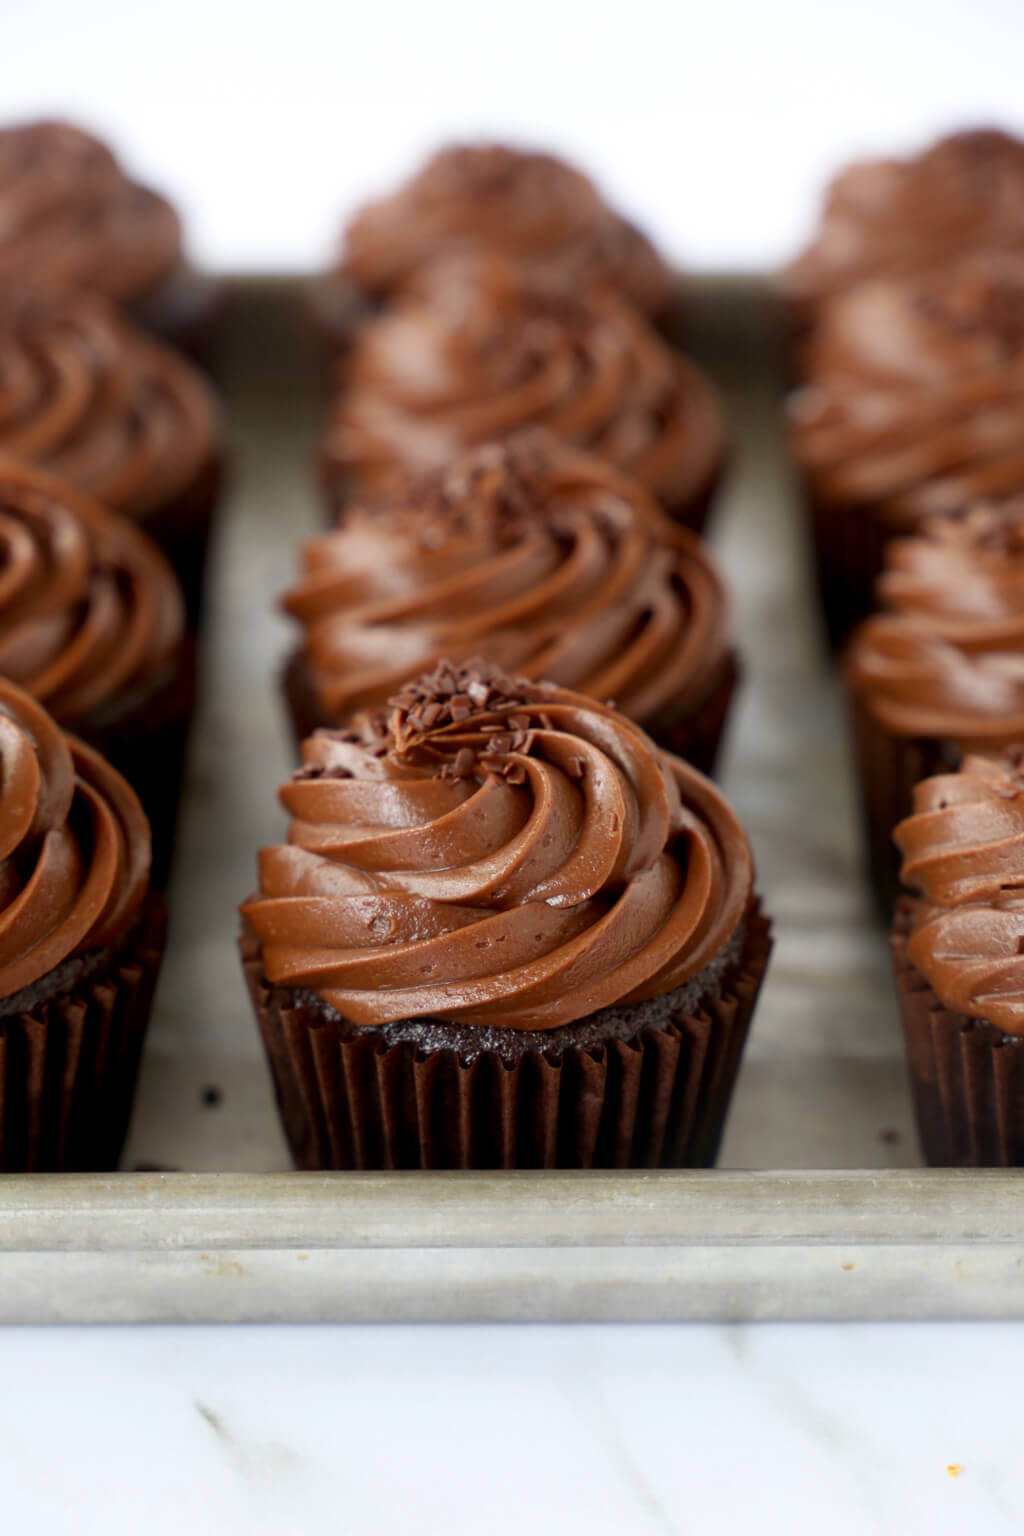 A baking sheet lined with brown cupcakes with brown frosting.